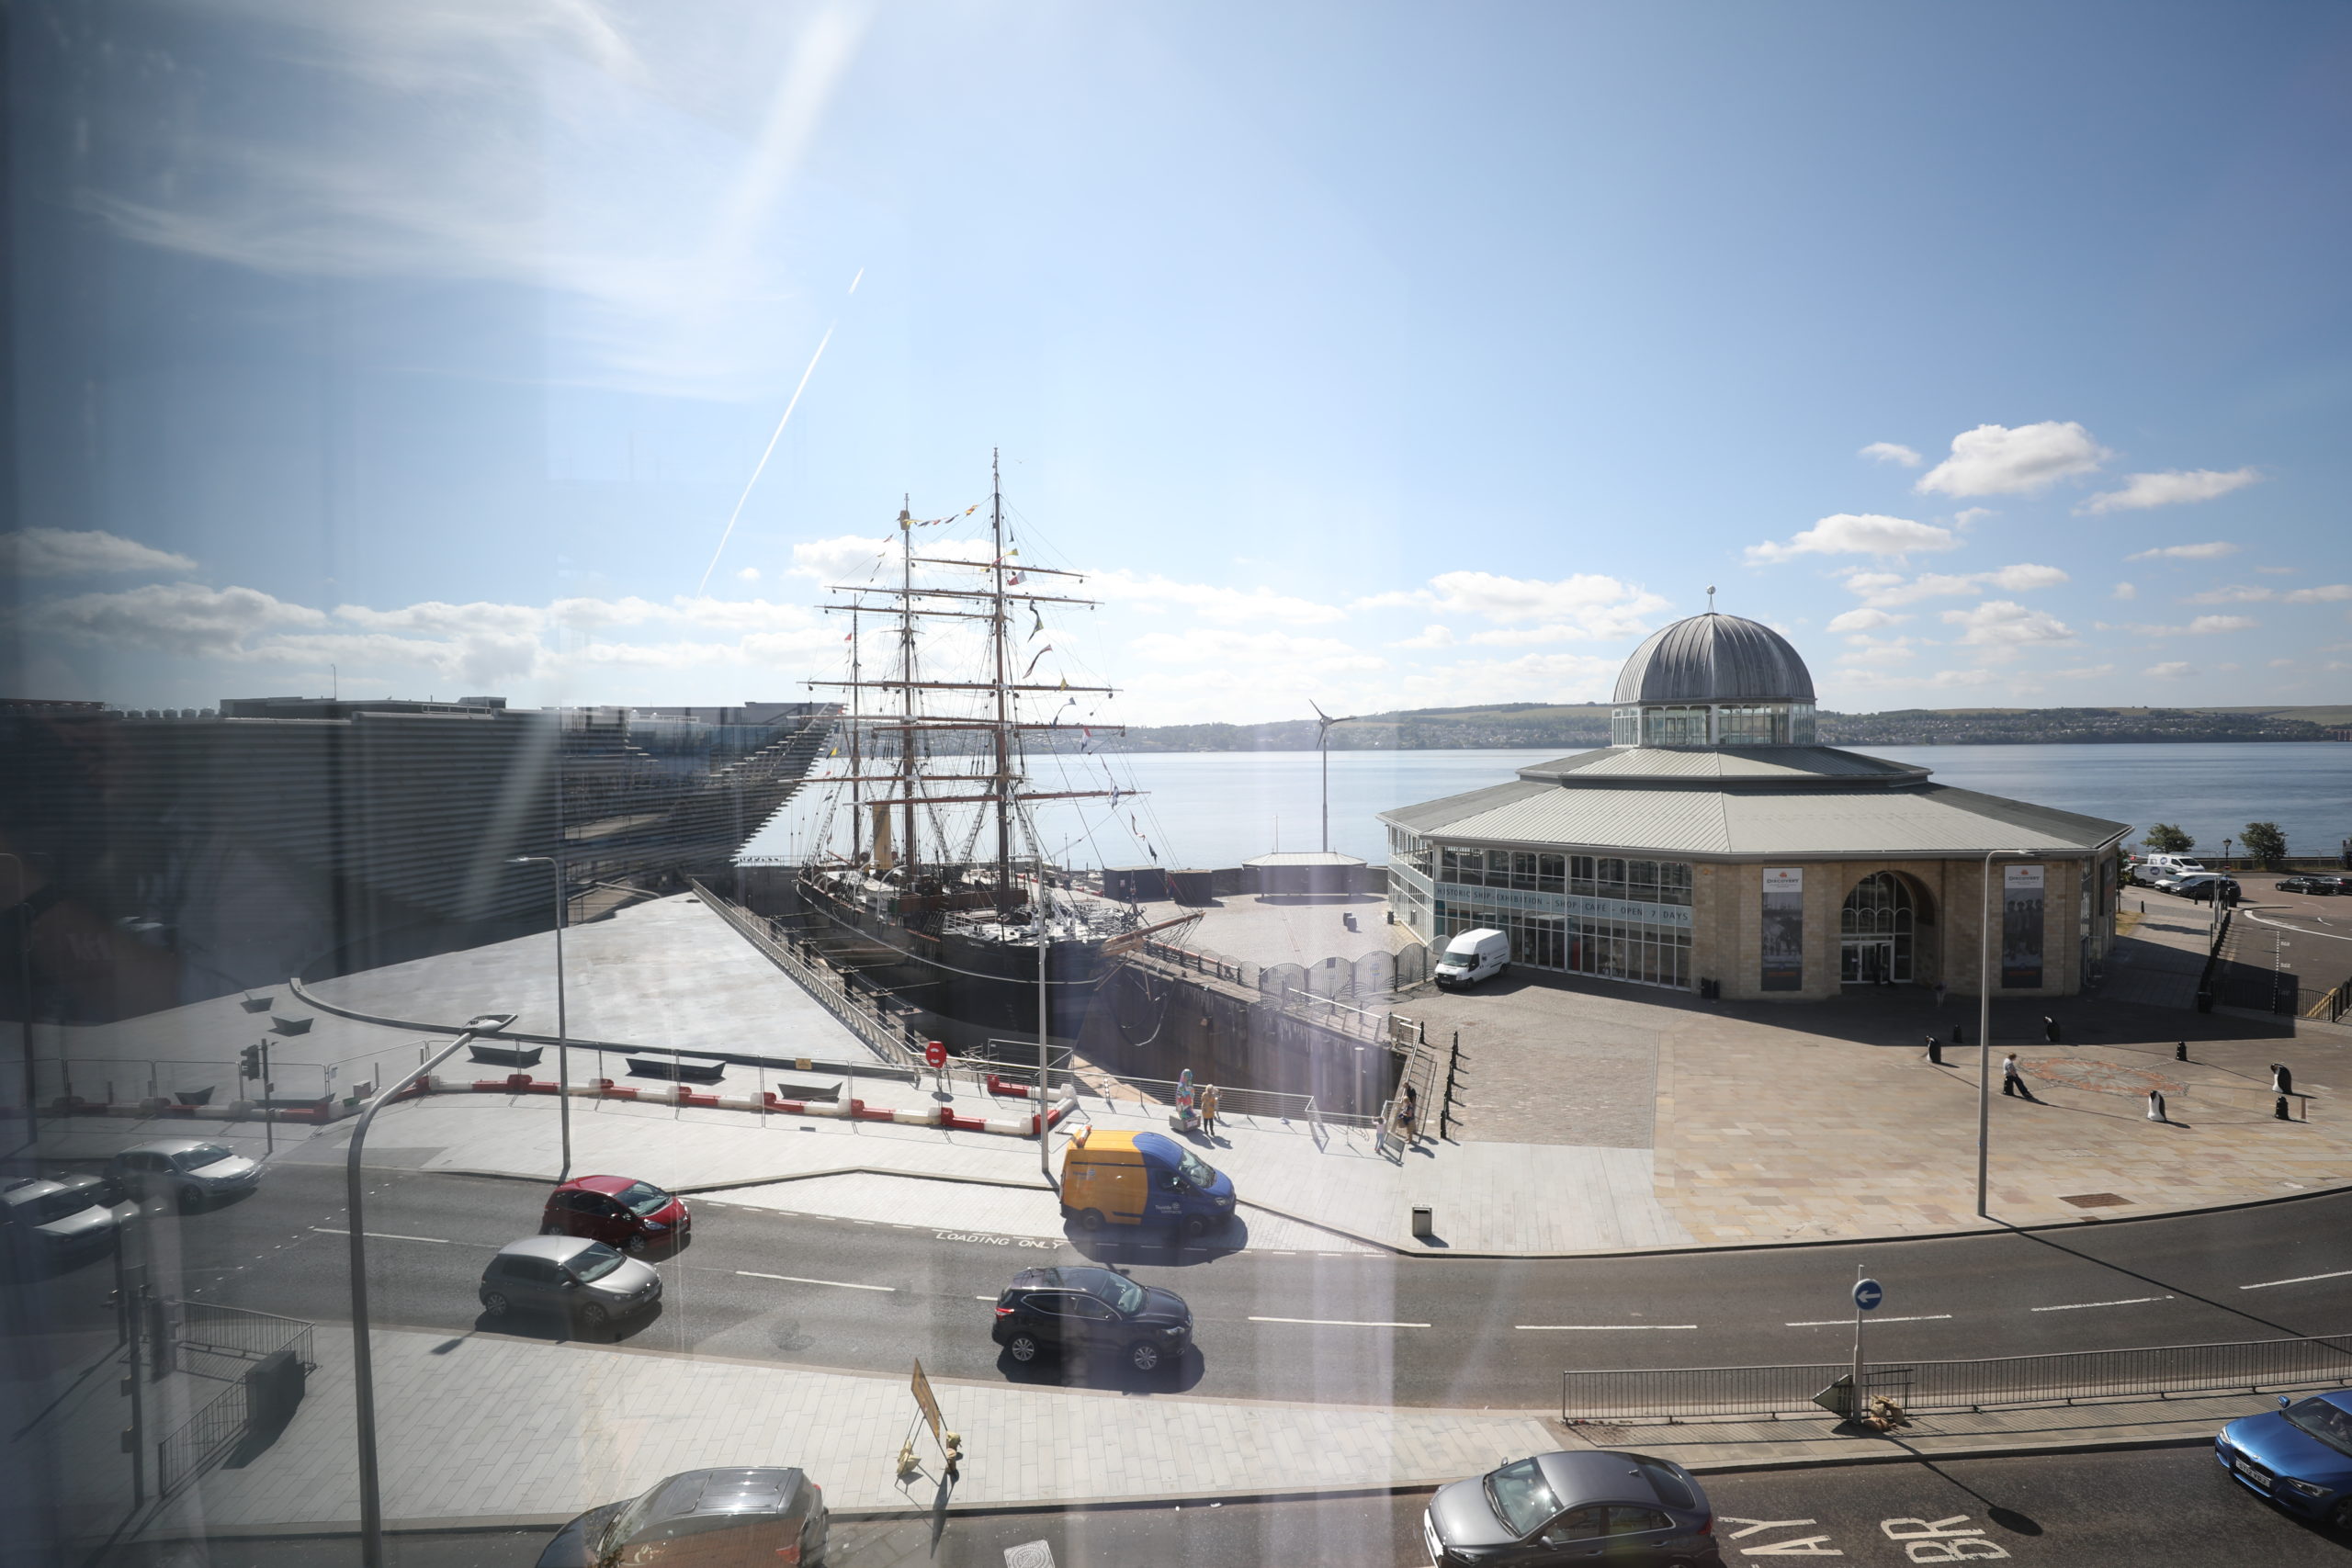 A view of Dundee Waterfront from the Sleeperz Hotel.